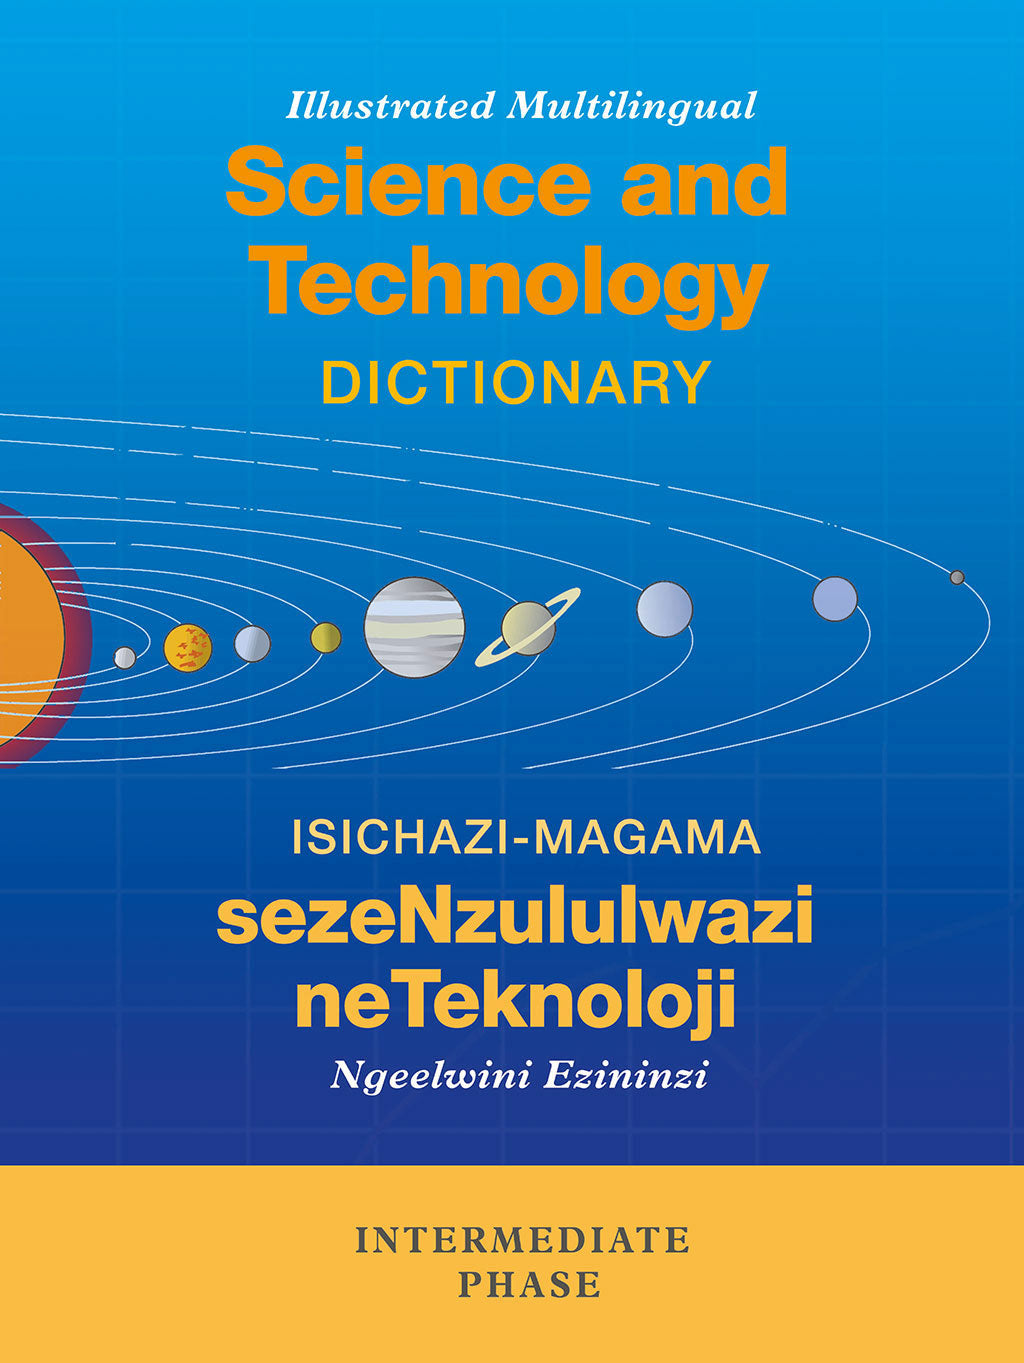 ILLUSTRATED MULTILINGUAL SCIENCE AND TECHNOLOGY DICTIONARY